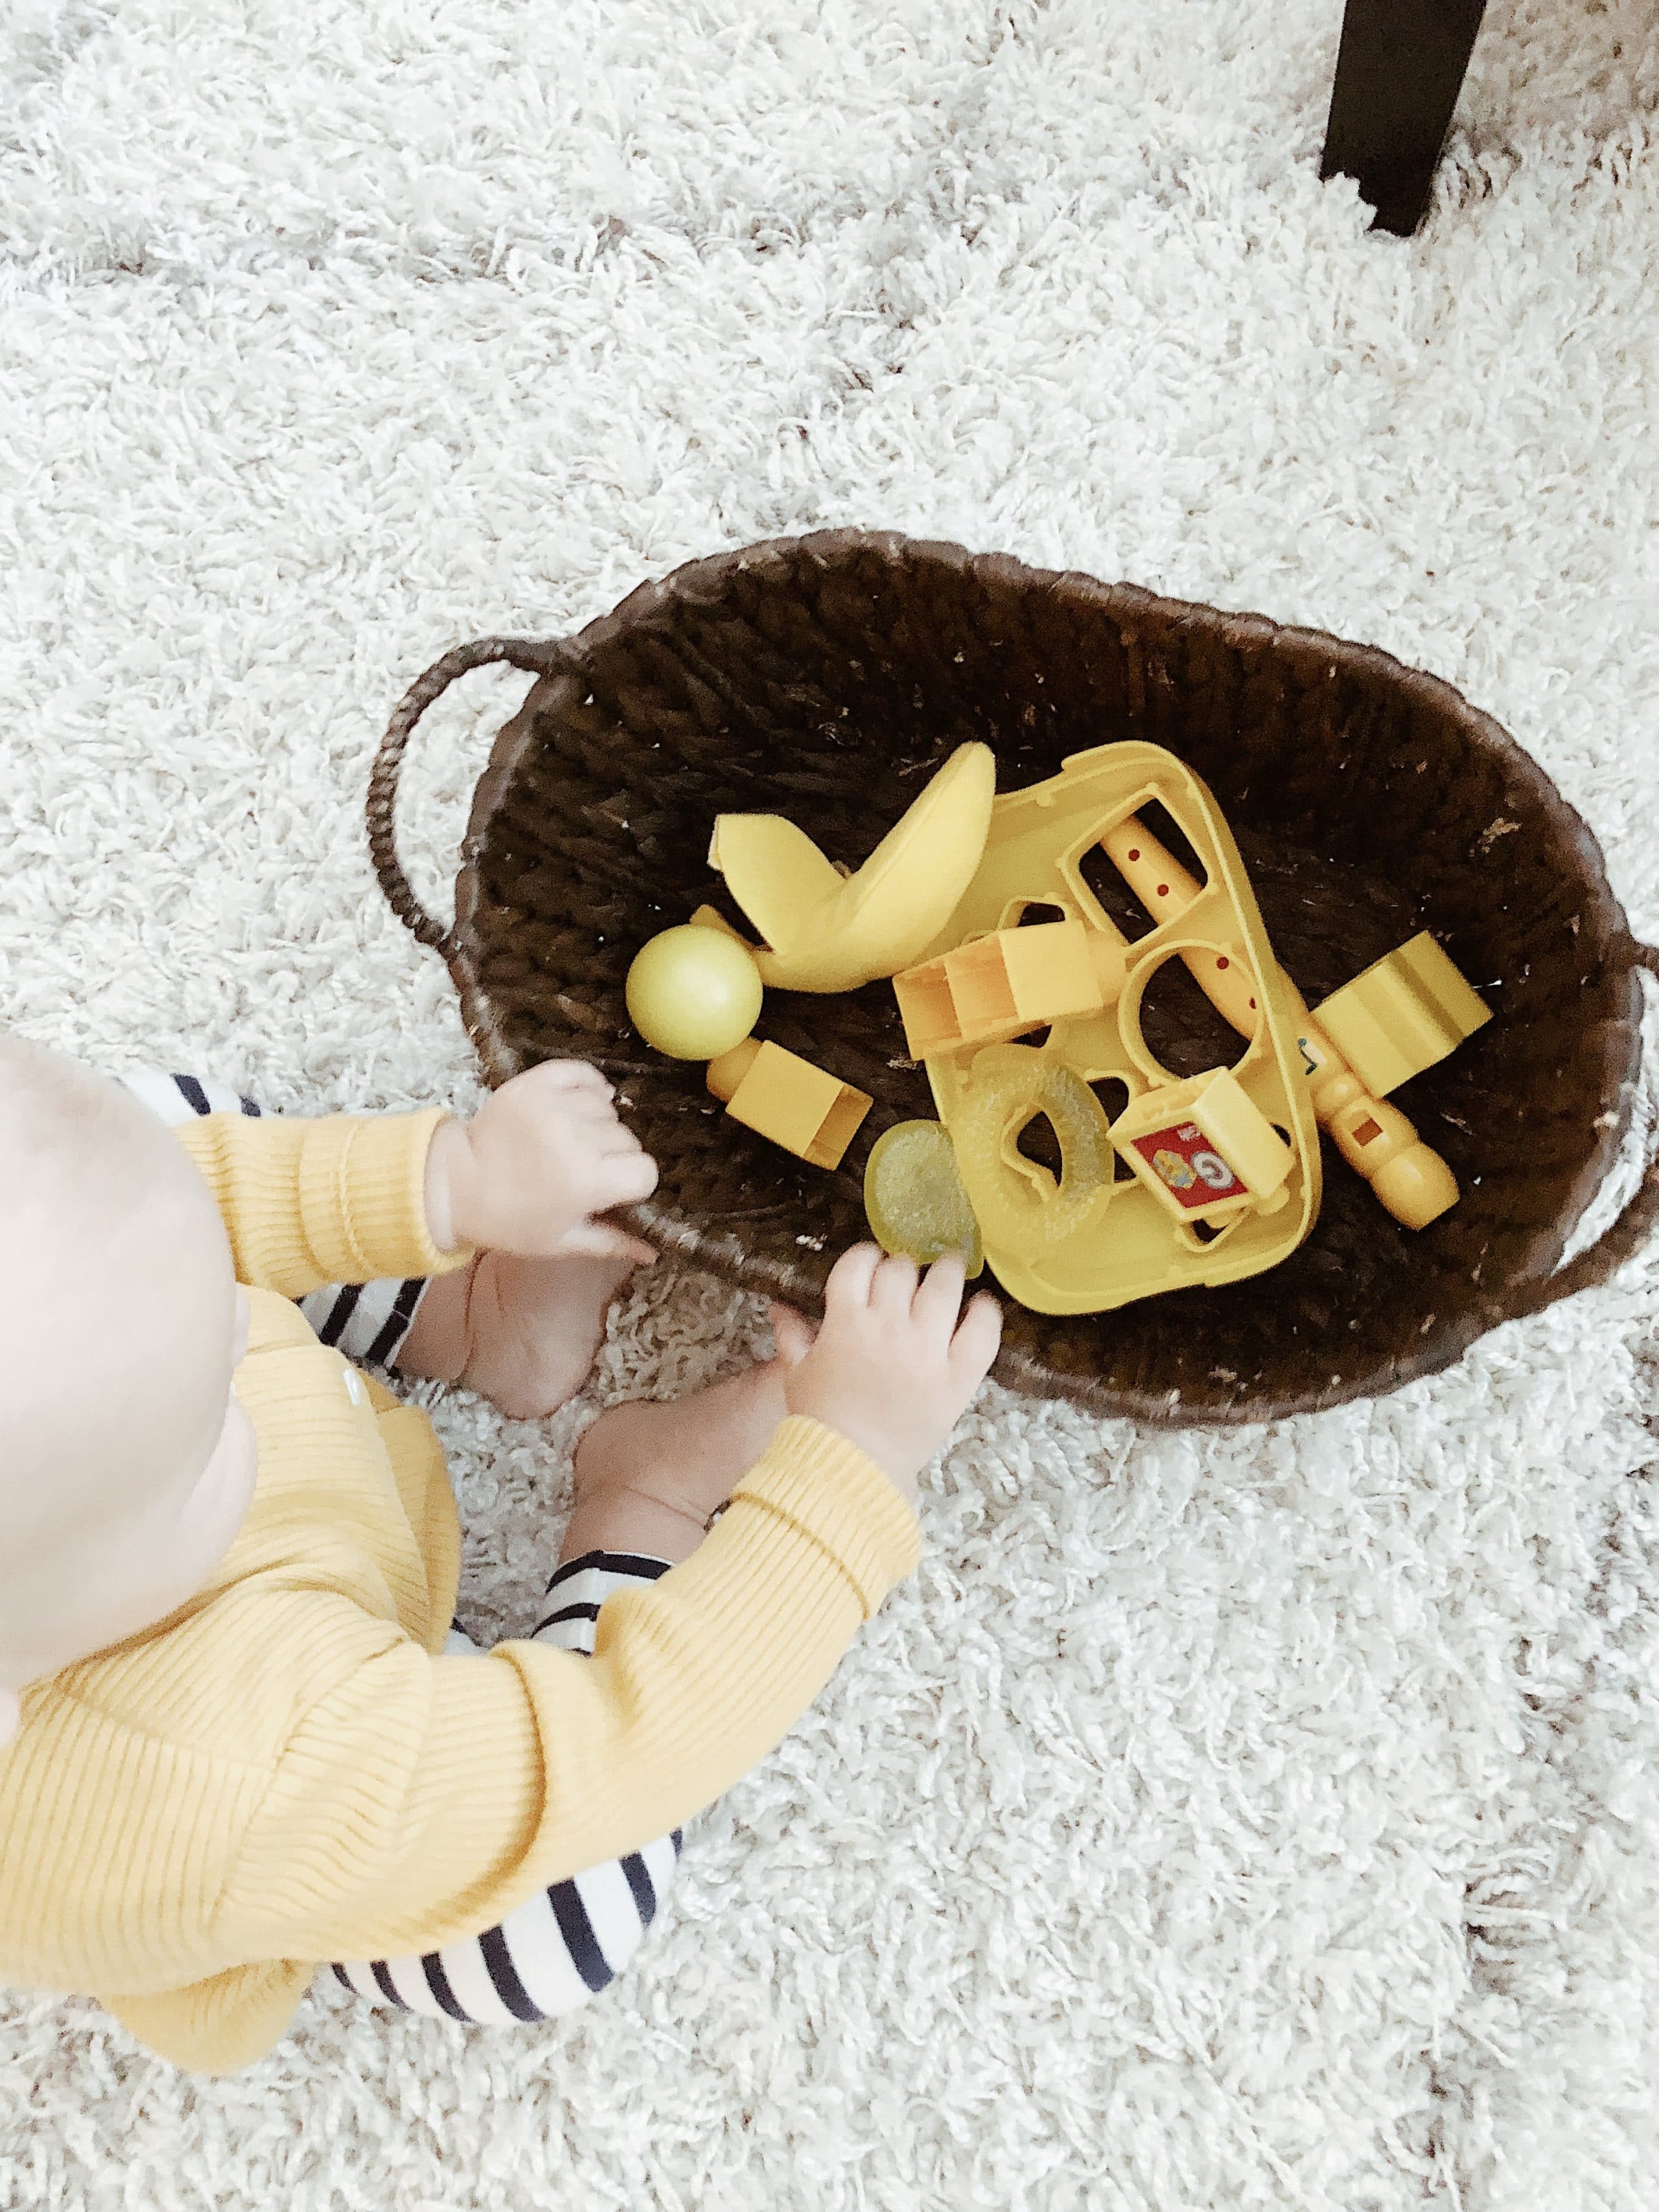 20 Toddler Activities for Learning and Development